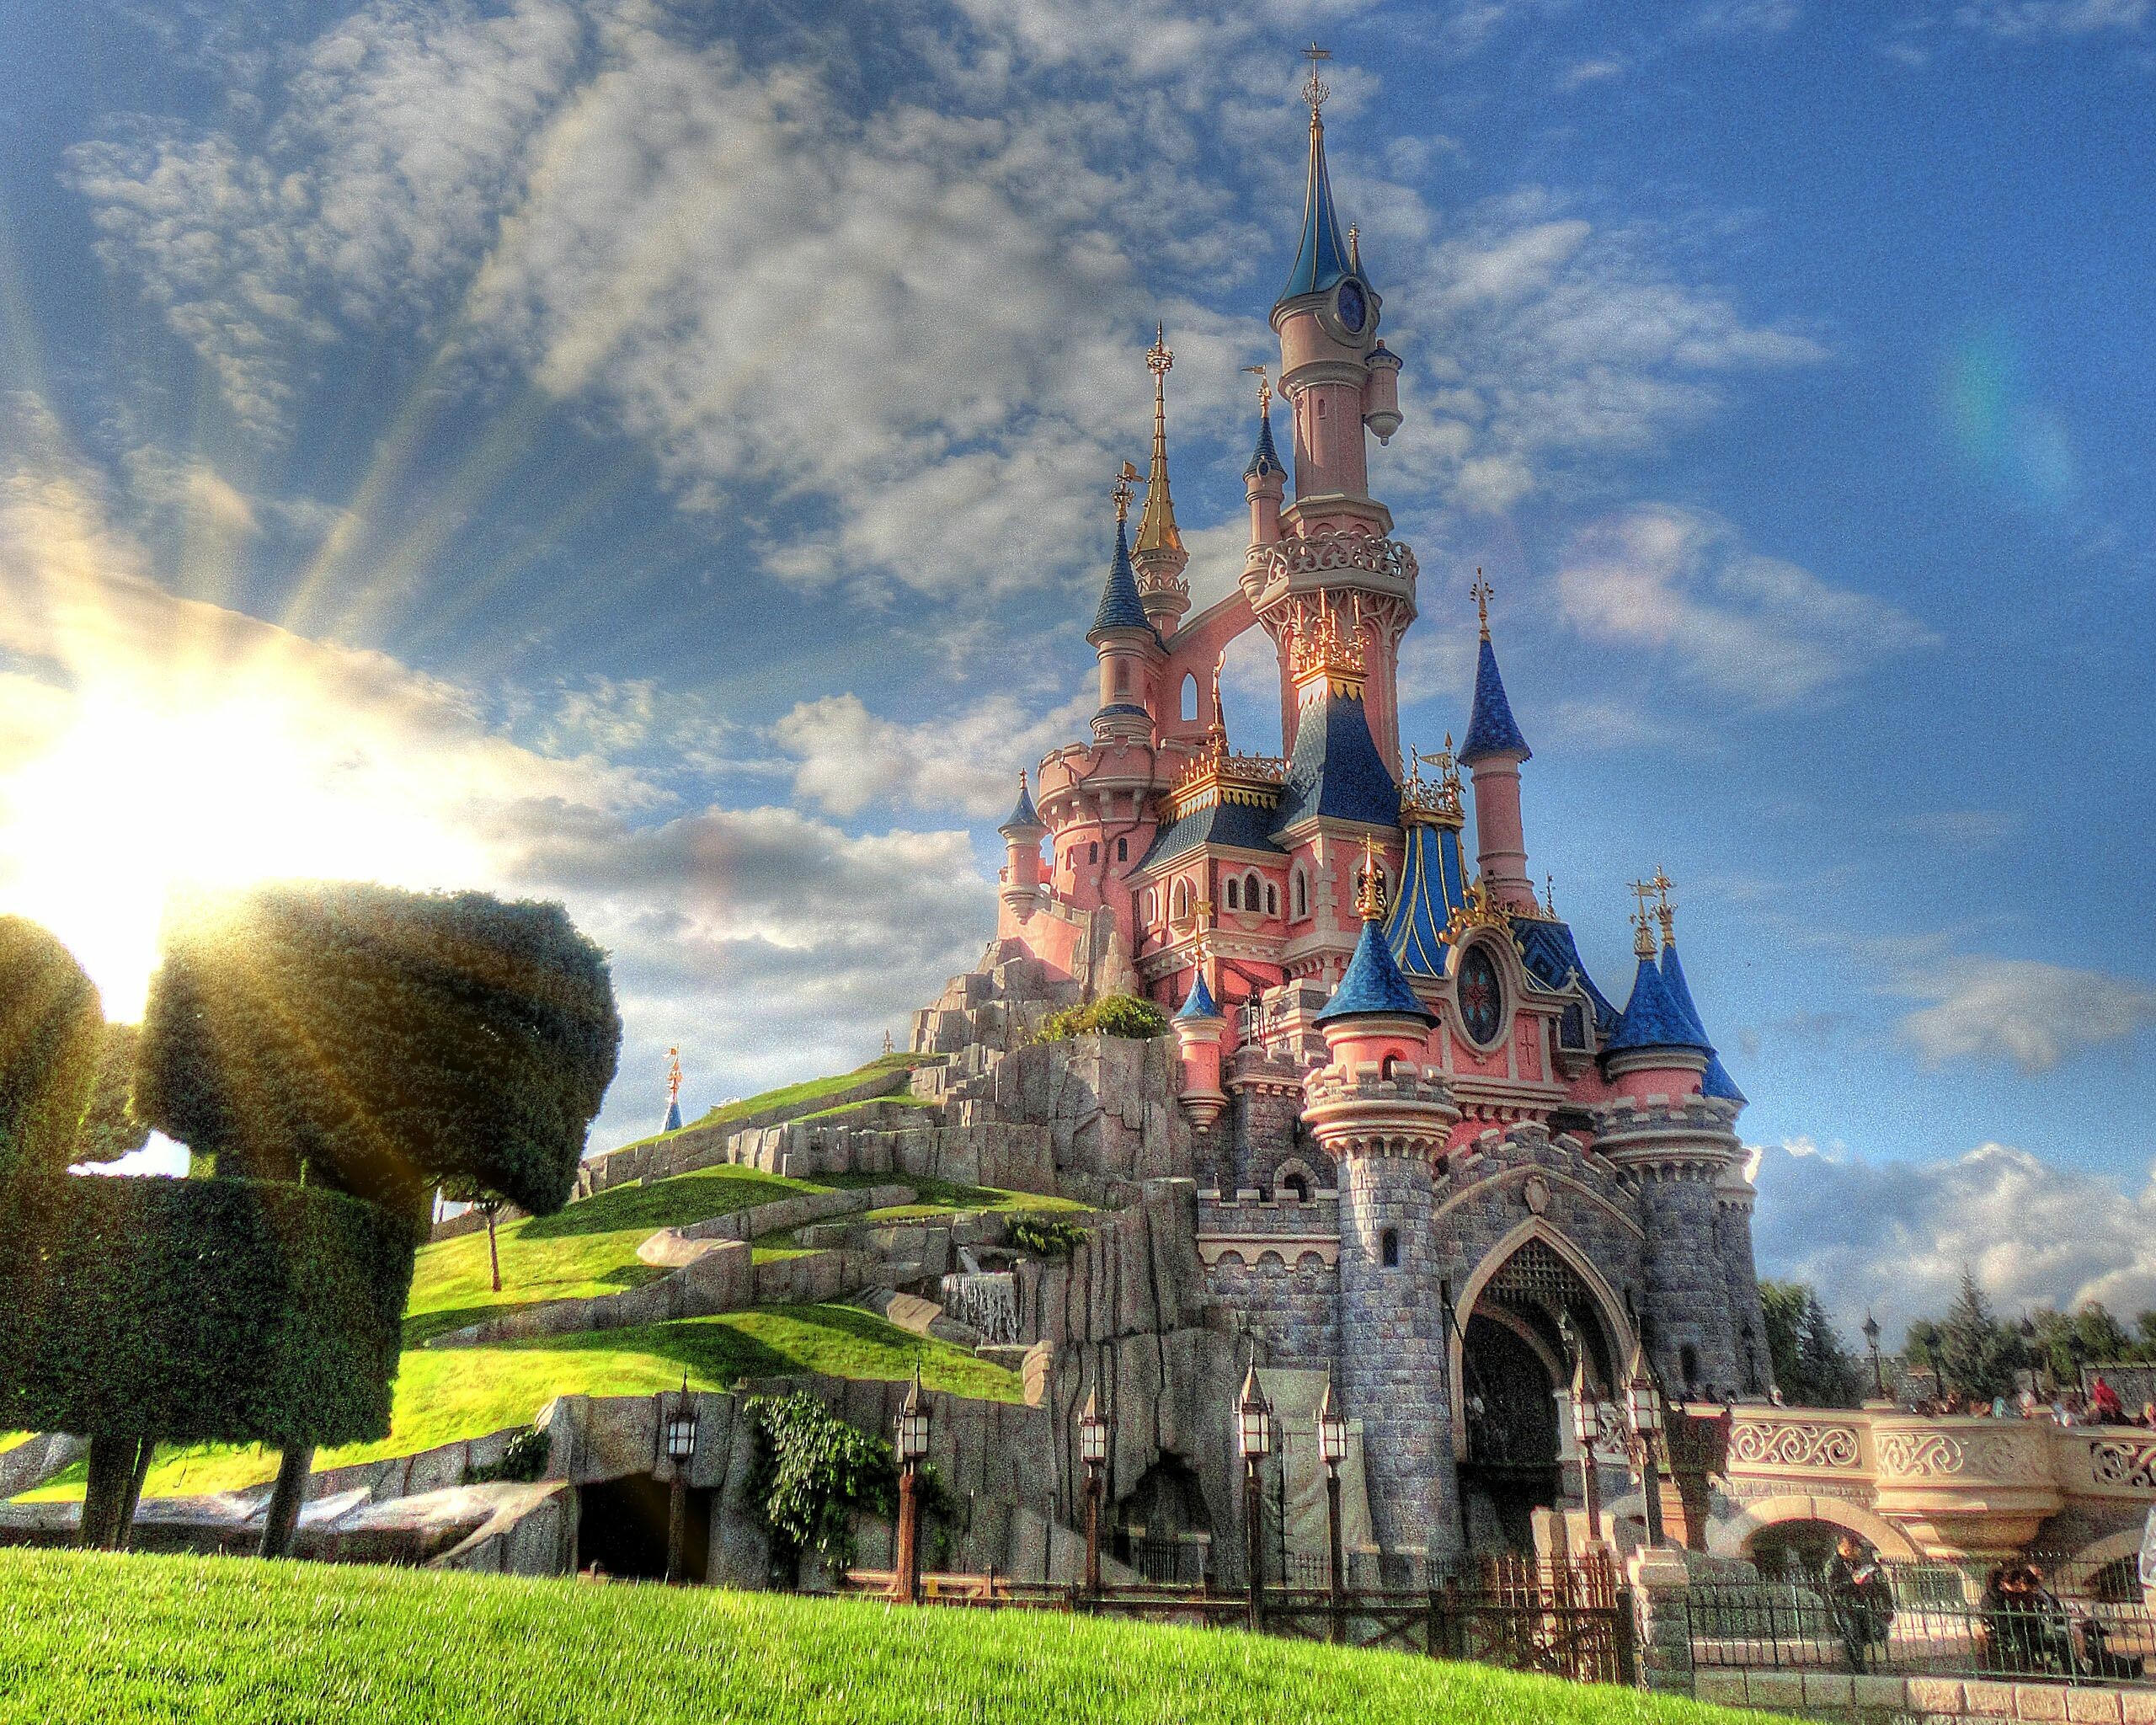 Disneyland: Paris, The Castle of the Beauty Sleeping in the Wood, A theme park. 2560x2050 HD Wallpaper.